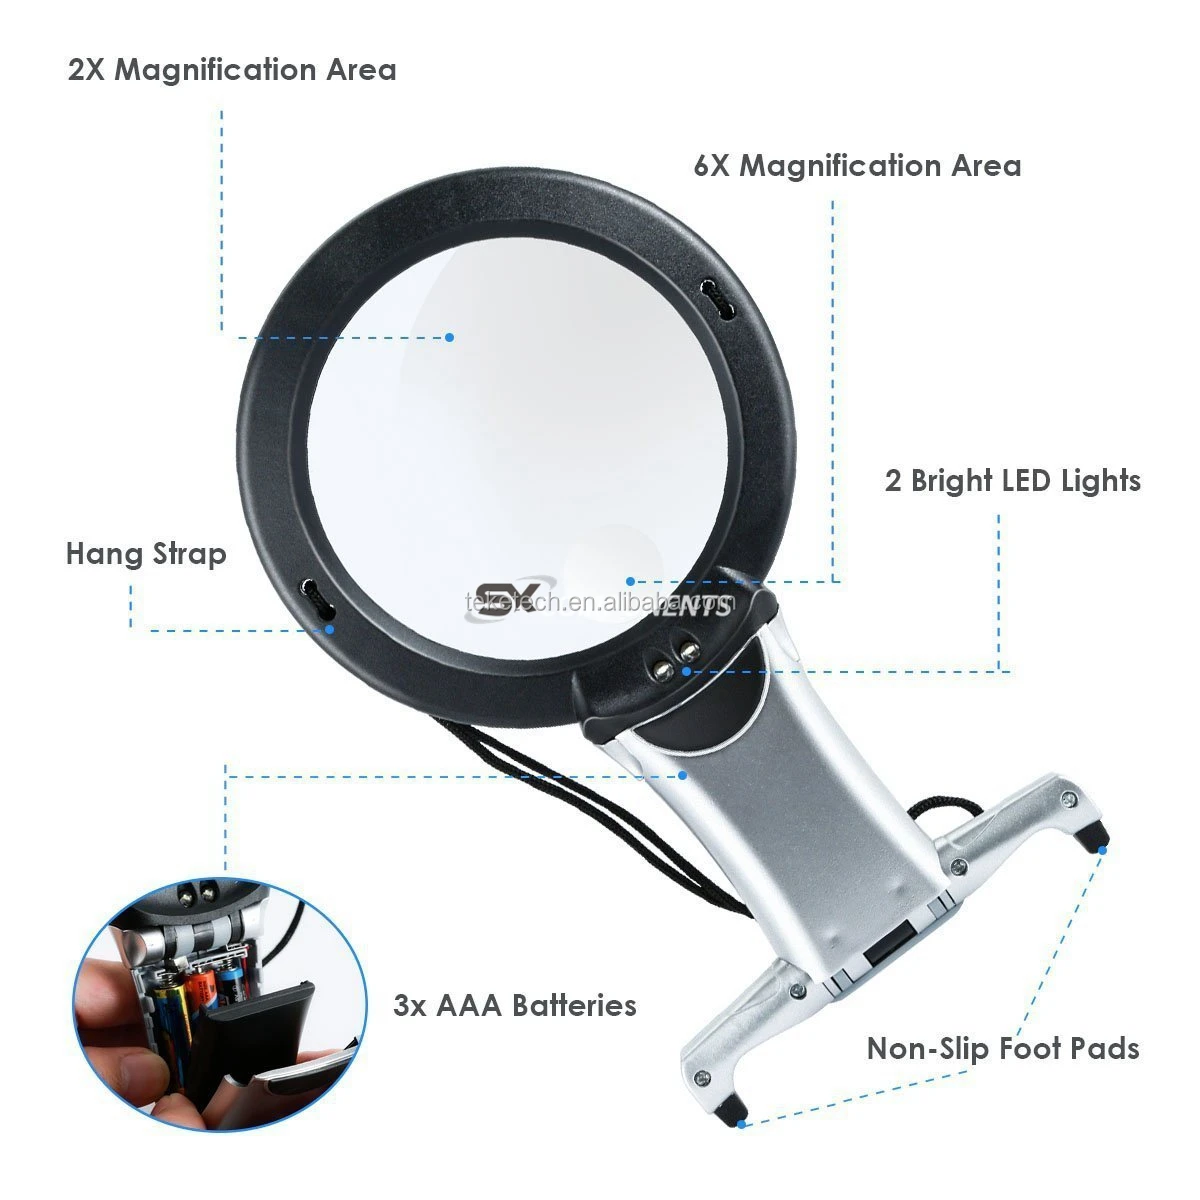 Magnifying Glasses Hands Free LED Loupe Lighted Reading Magnifier Neck Wear Quality Magnifying Glass for Seniors Sewing Cross Stitch Embroidery 